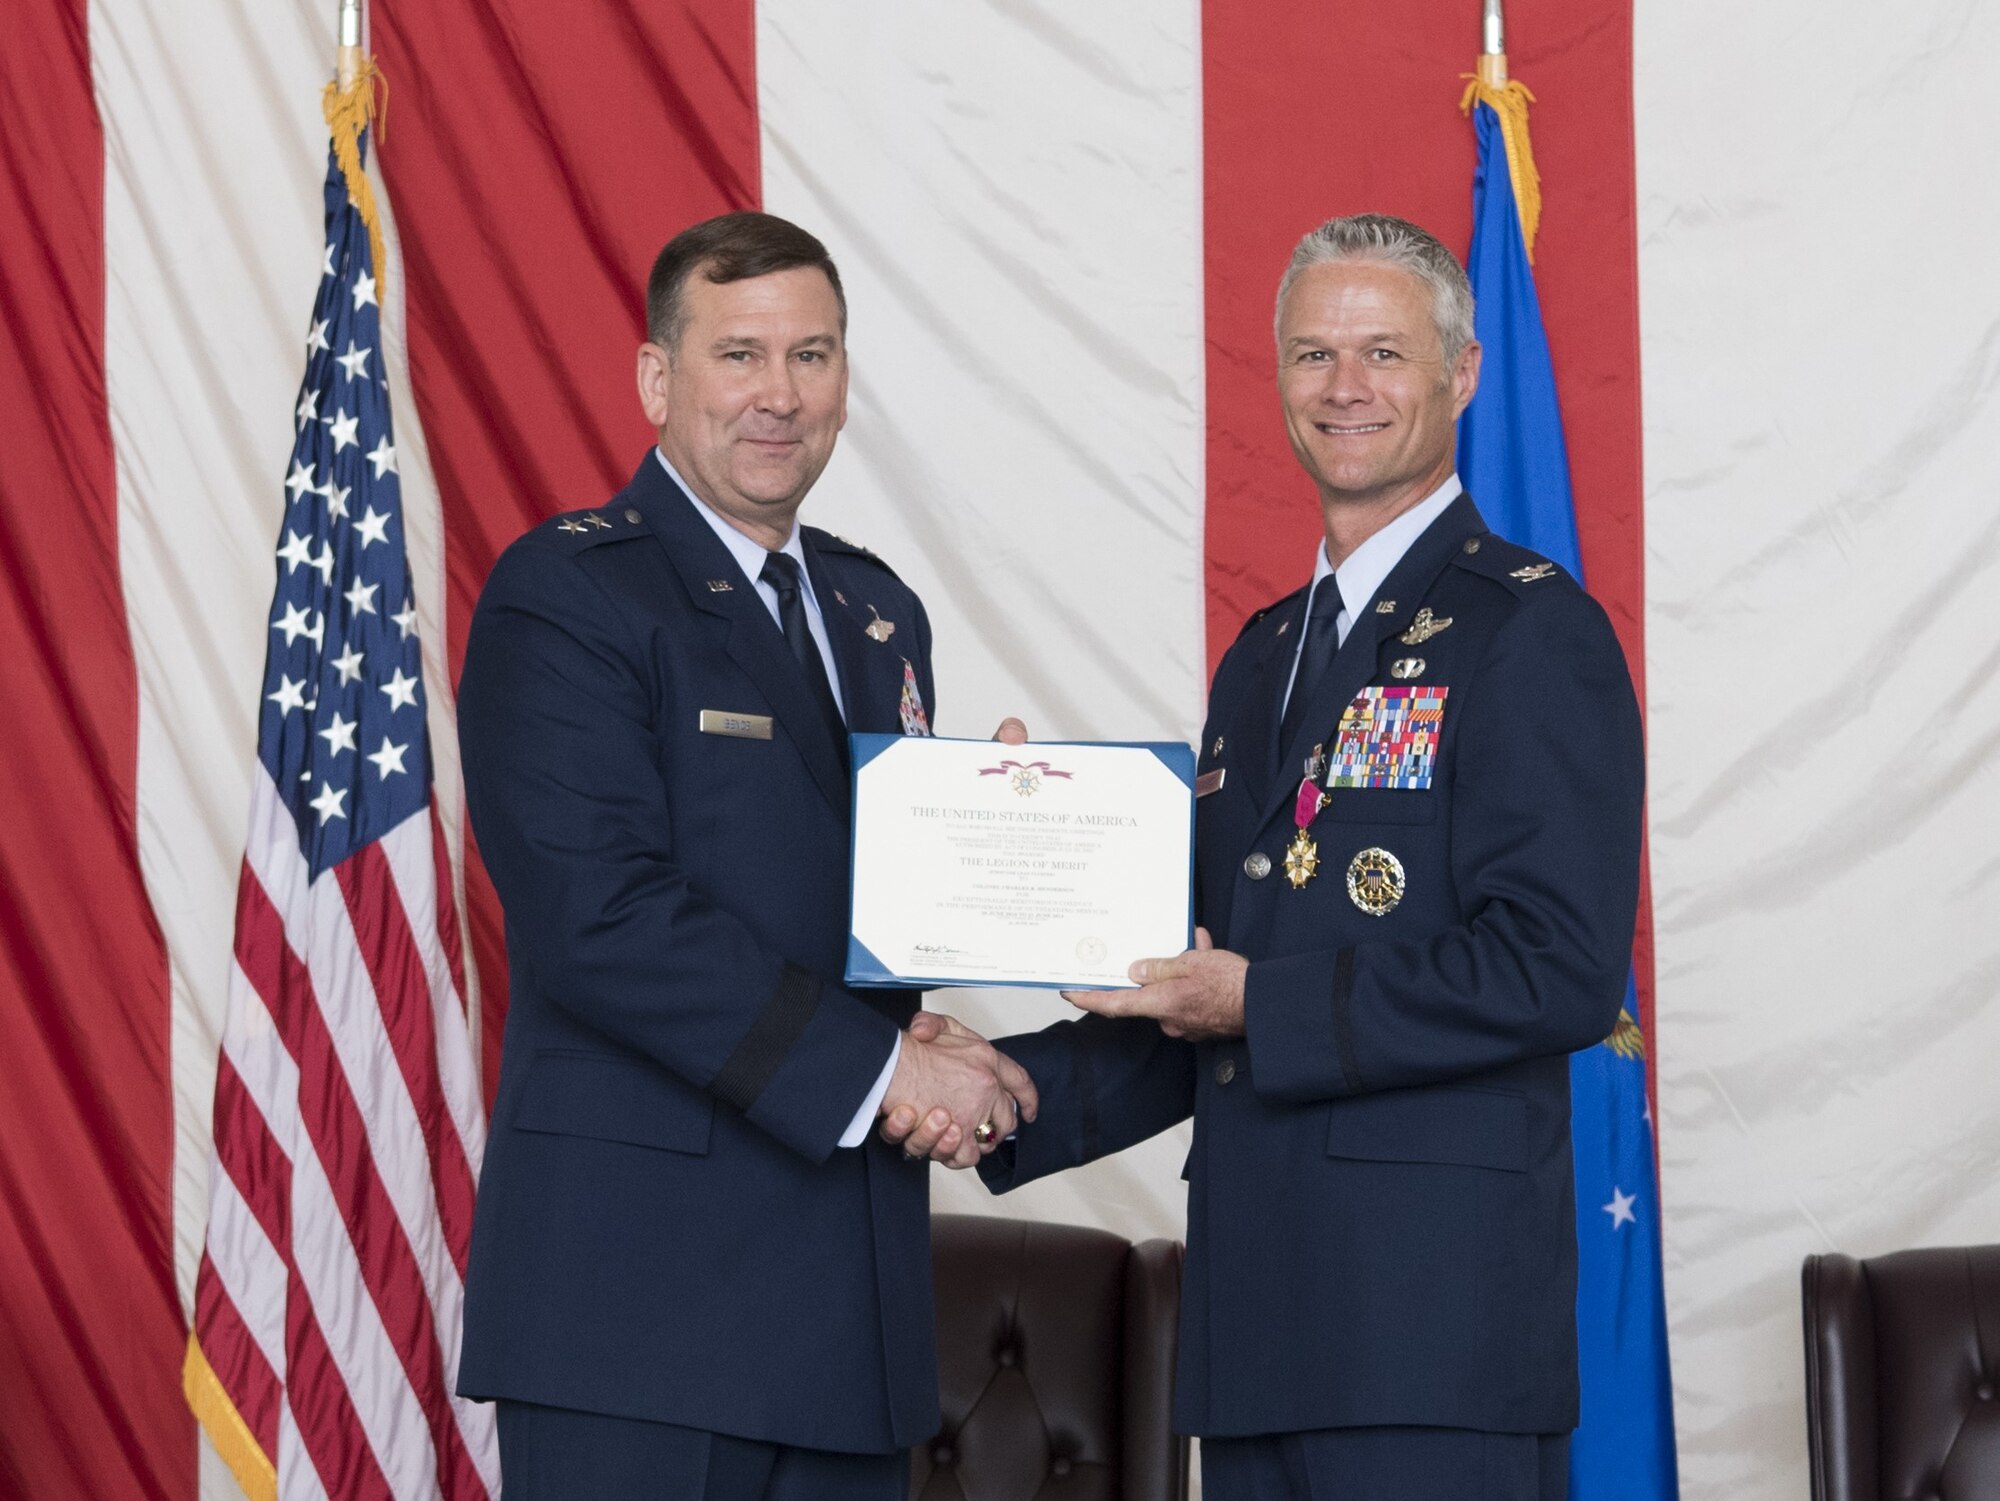 Maj. Gen. Christopher Bence, U.S. Air Force Expeditionary Center commander, presents Col. Charles Henderson with the Legion of Merit during the change of command ceremony where Henderson relinquished command of the 621 CRW to Marshall here June 21.